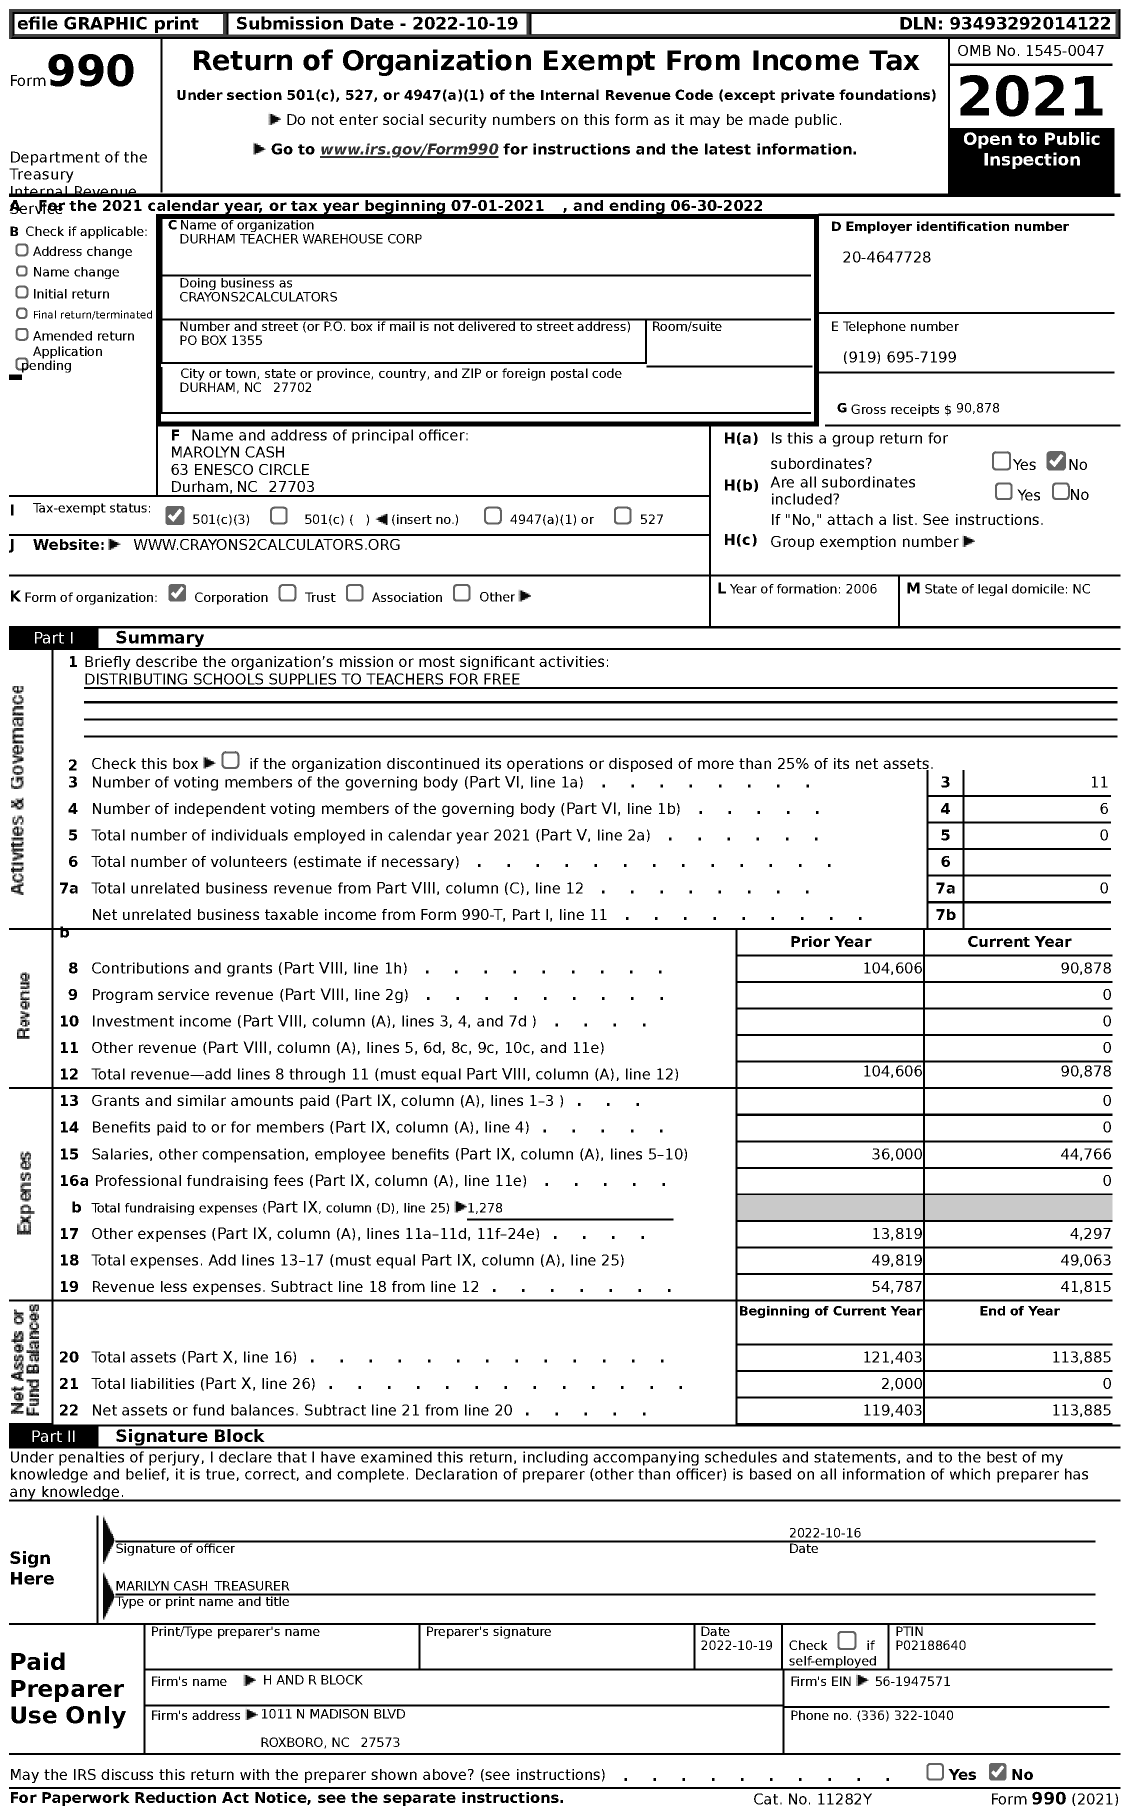 Image of first page of 2021 Form 990 for Crayons2calculators